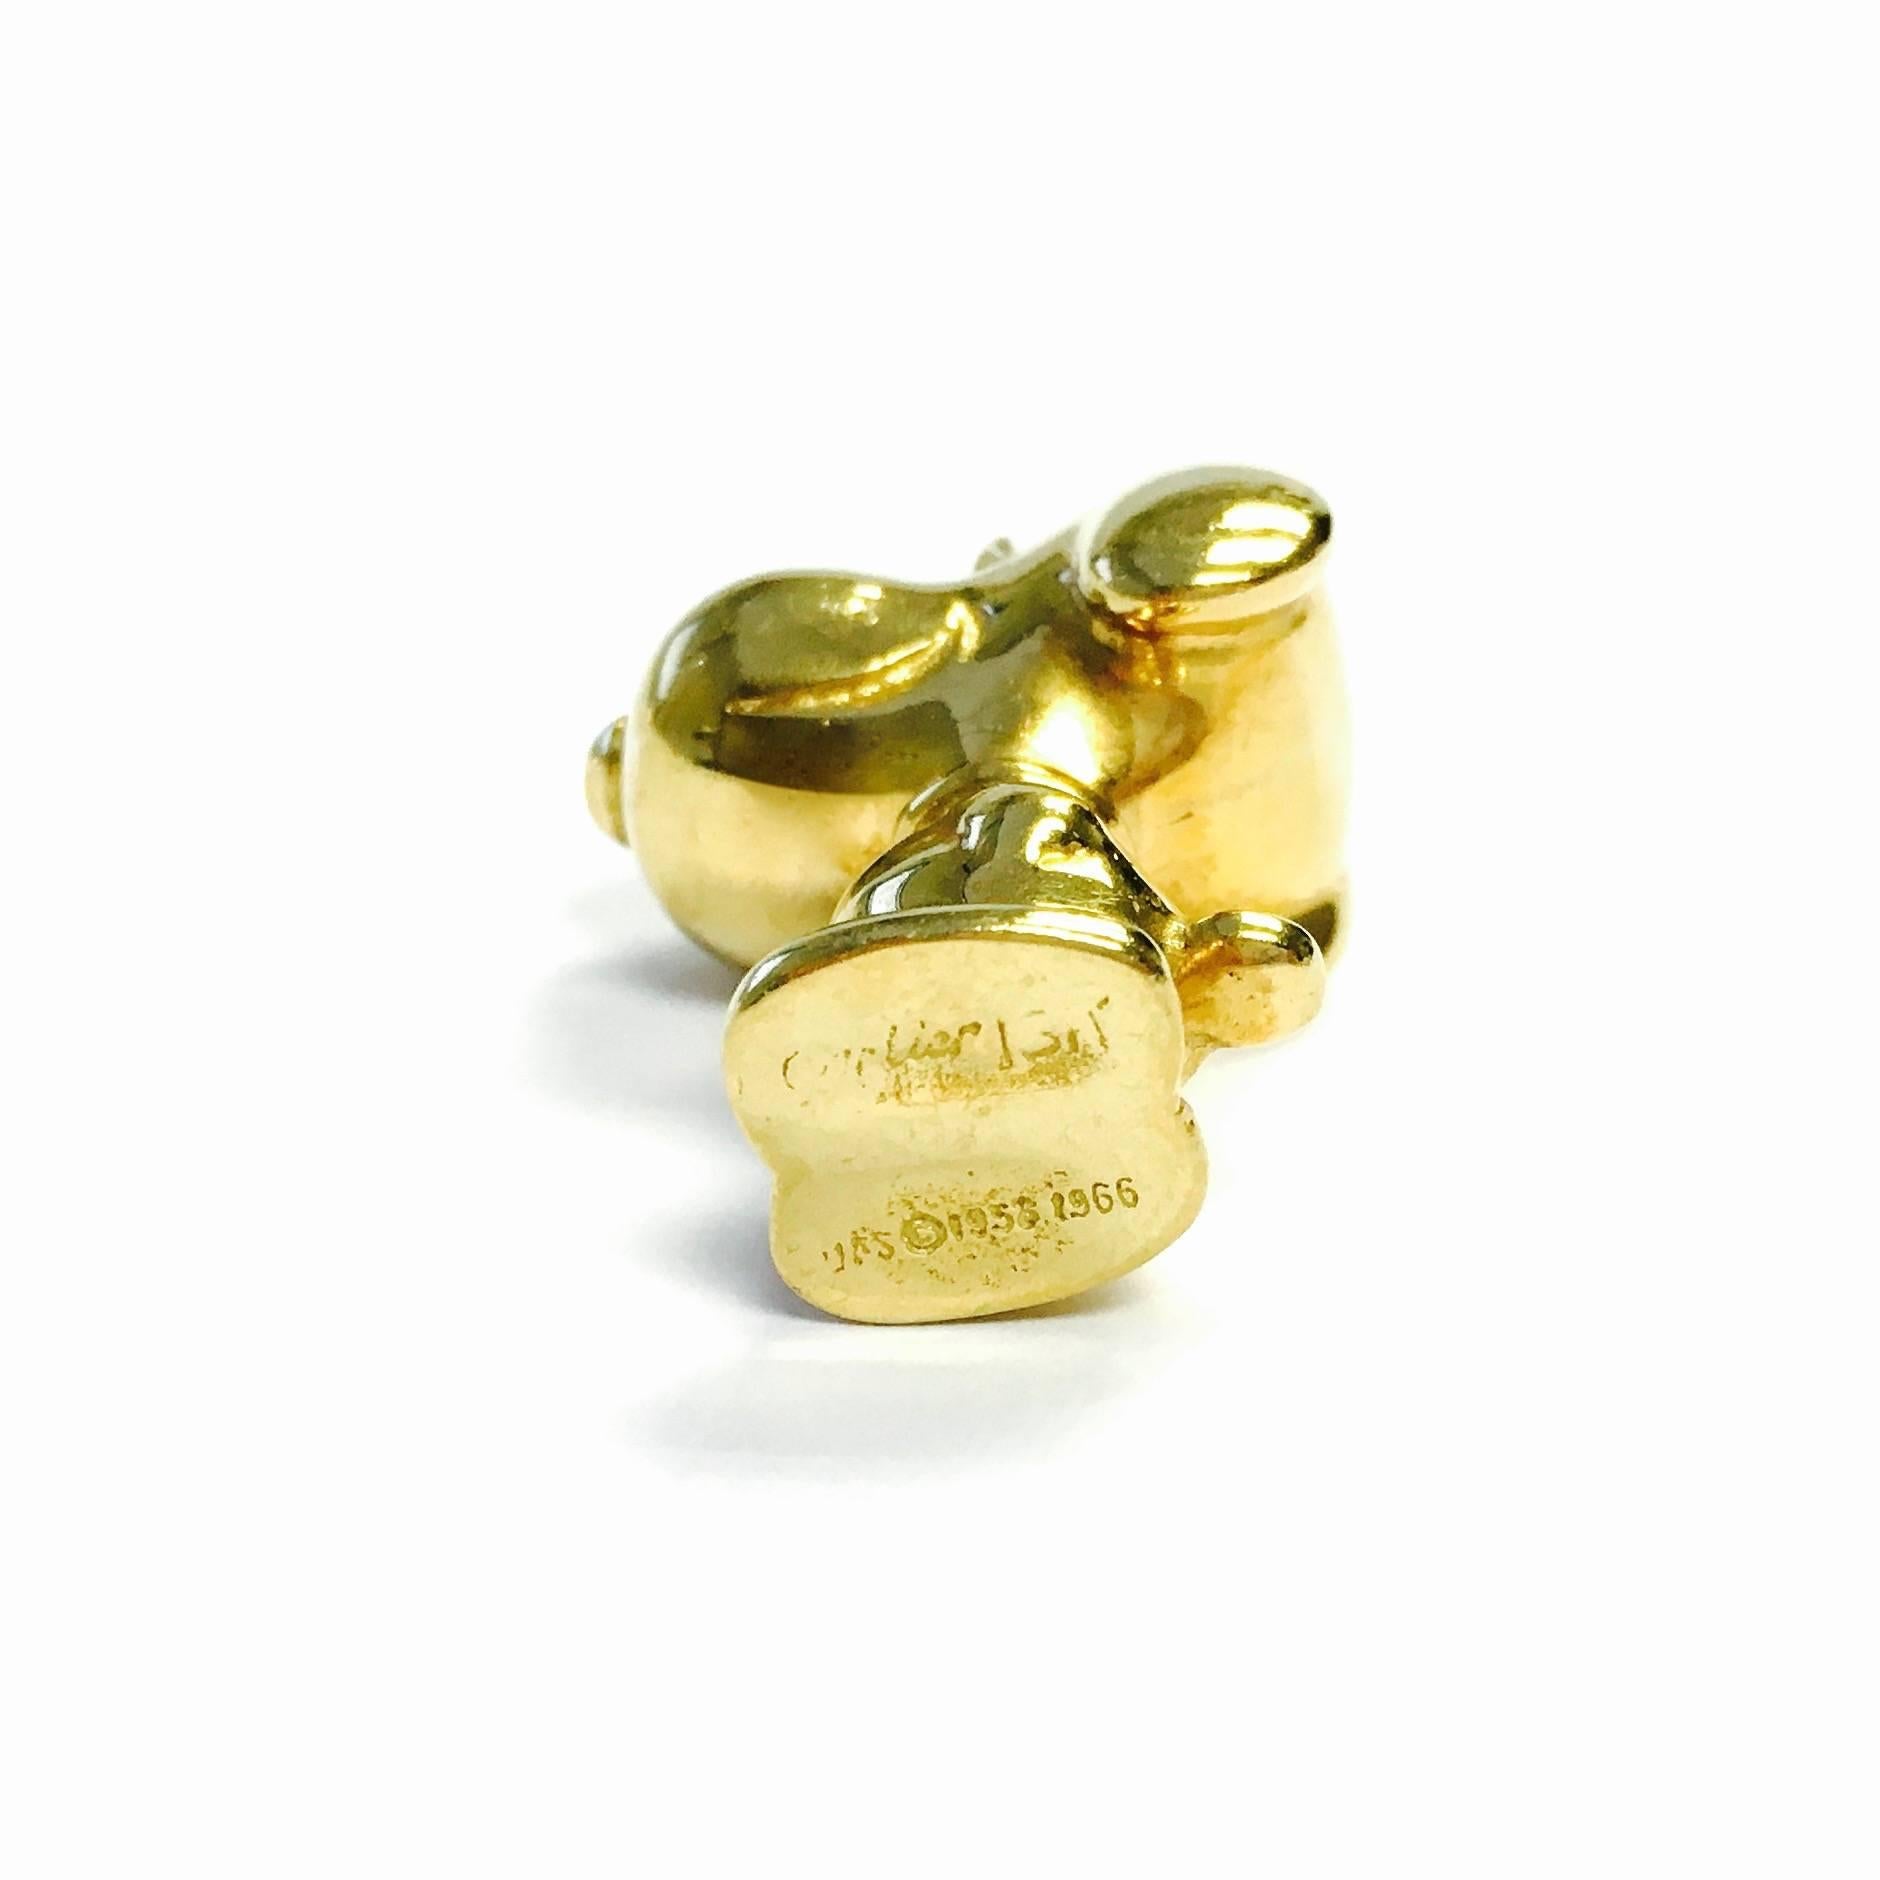 Rare Limited Edition Cartier Snoopy 18K yellow gold 1inch tall charm pendant. In 1958, 1966, Cartier reintroduced its good-luck charm tradition.
Weight: 18.2 grams
Marked: Cartier 18K
UFS C 1958, 1966 